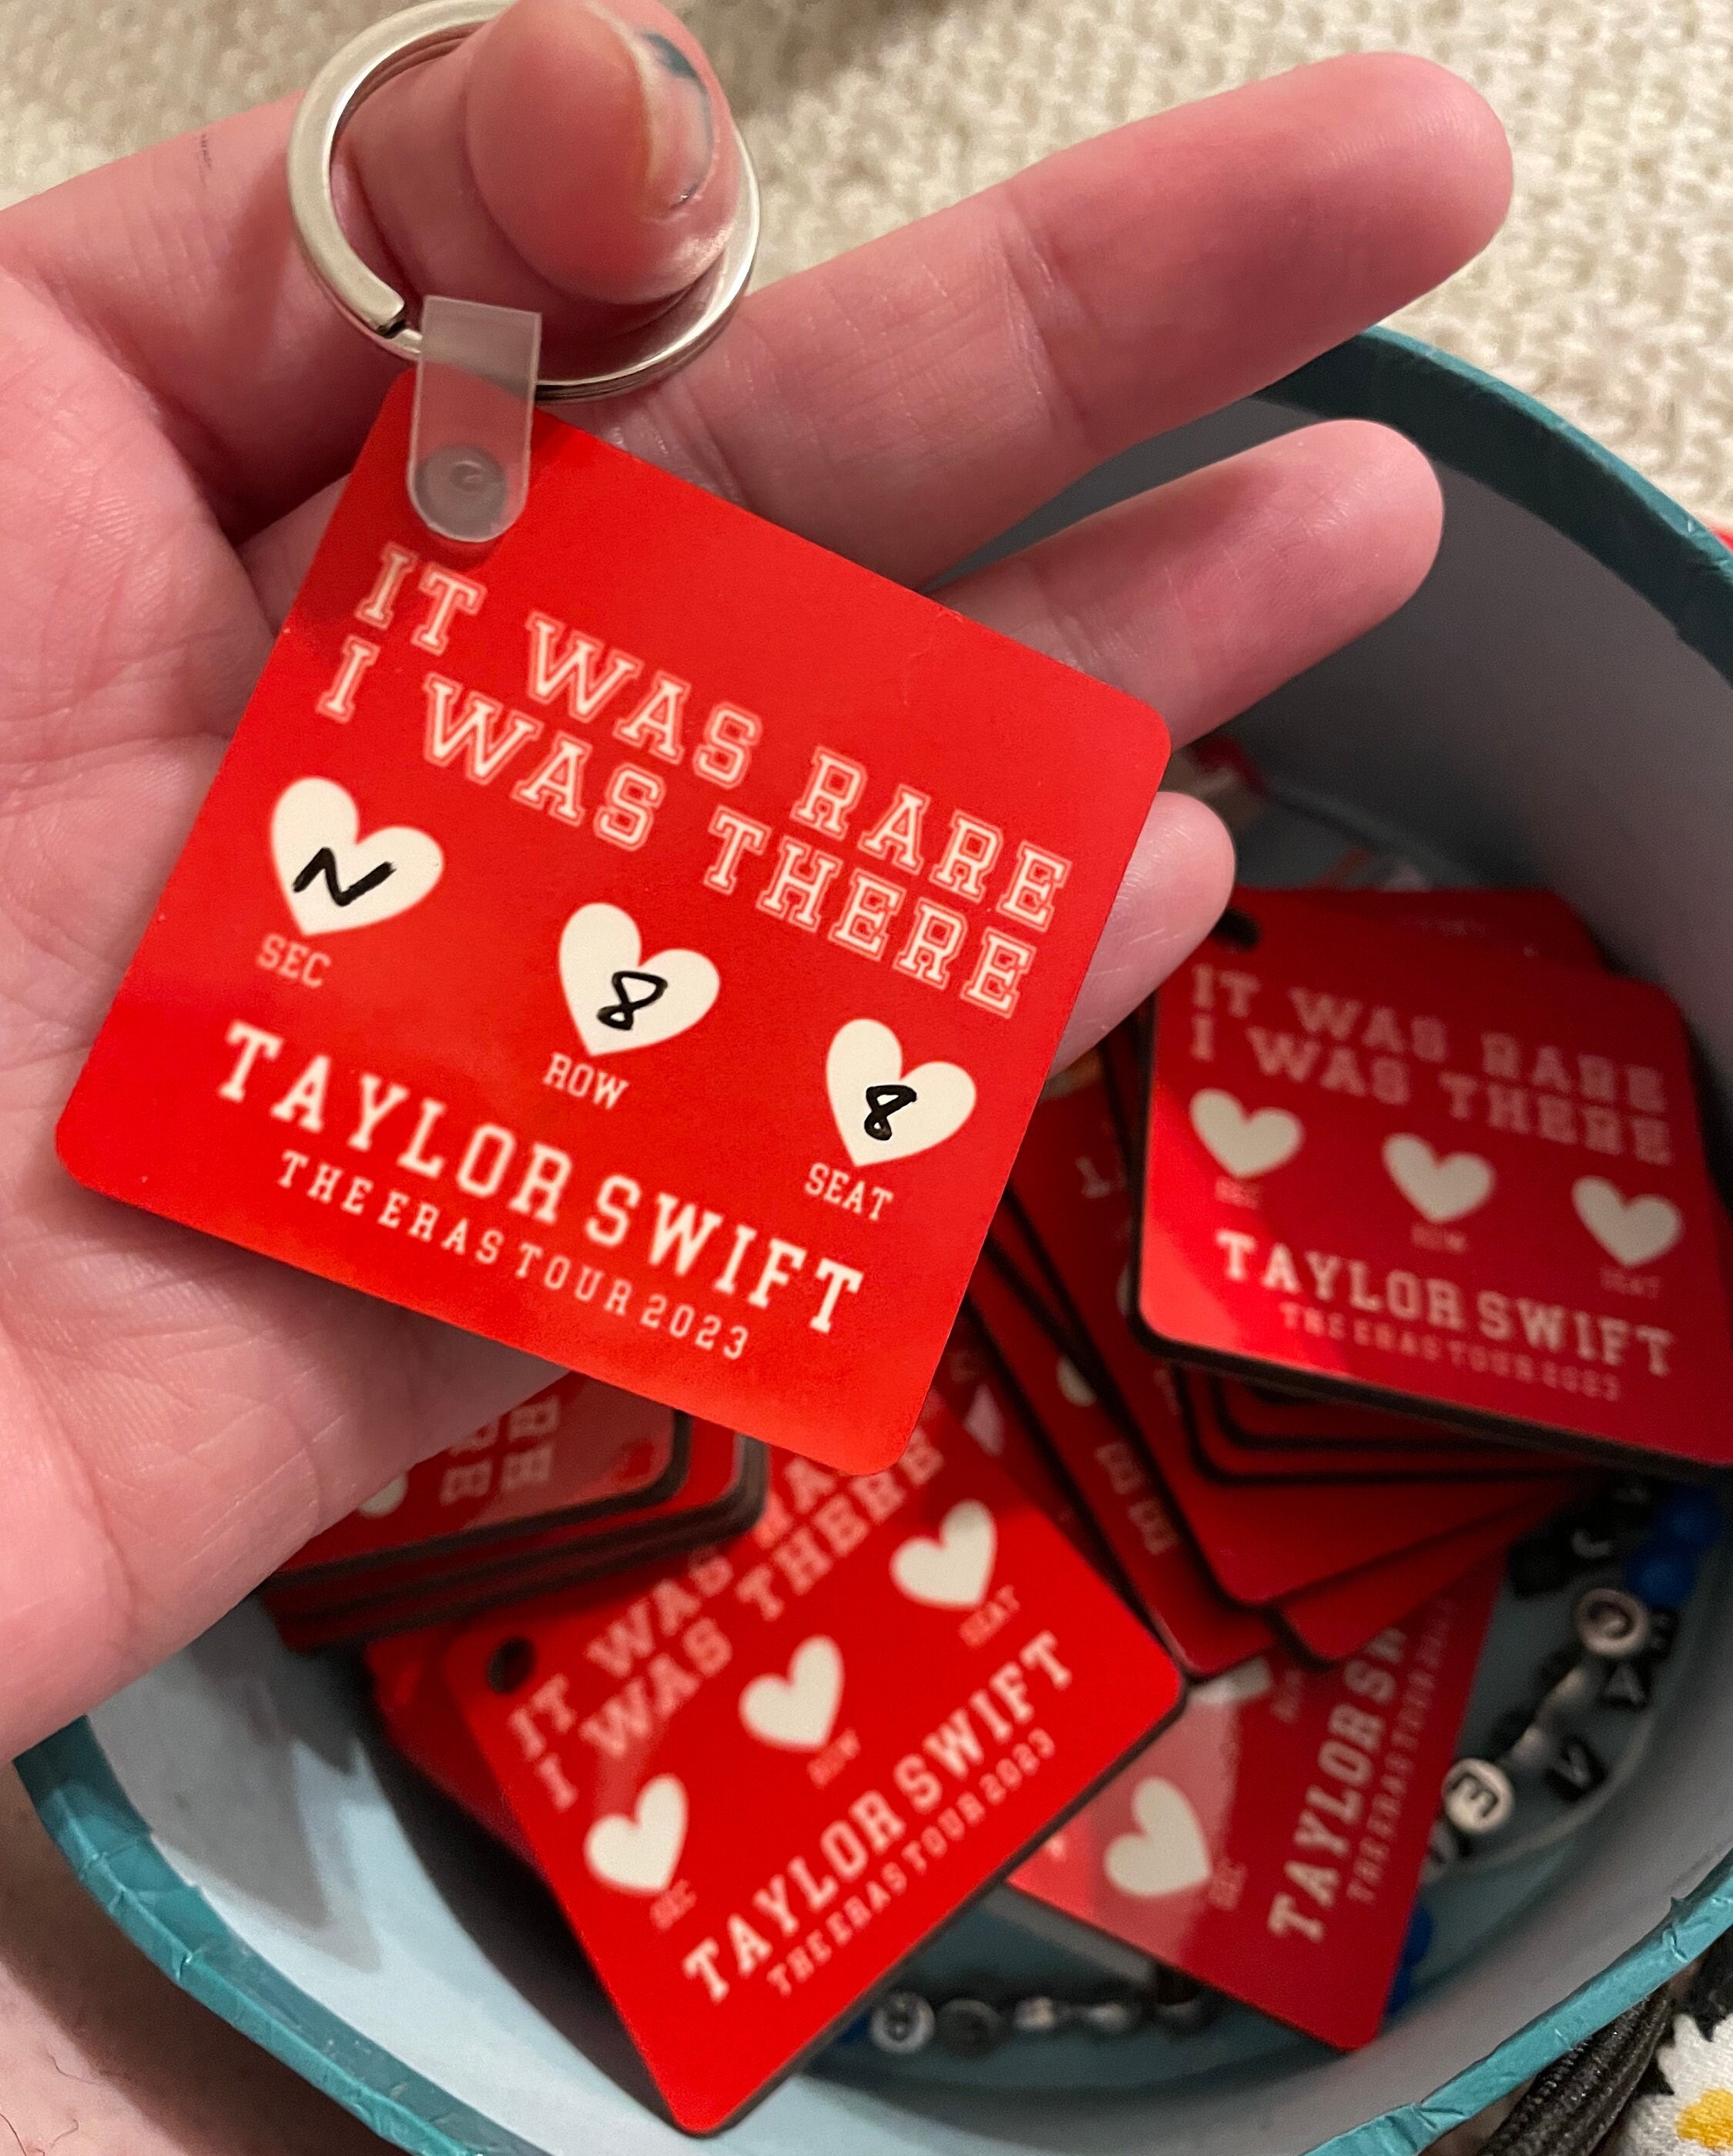 KeyChain  Taylor swift merchandise, Taylor swift pictures, Taylor swift